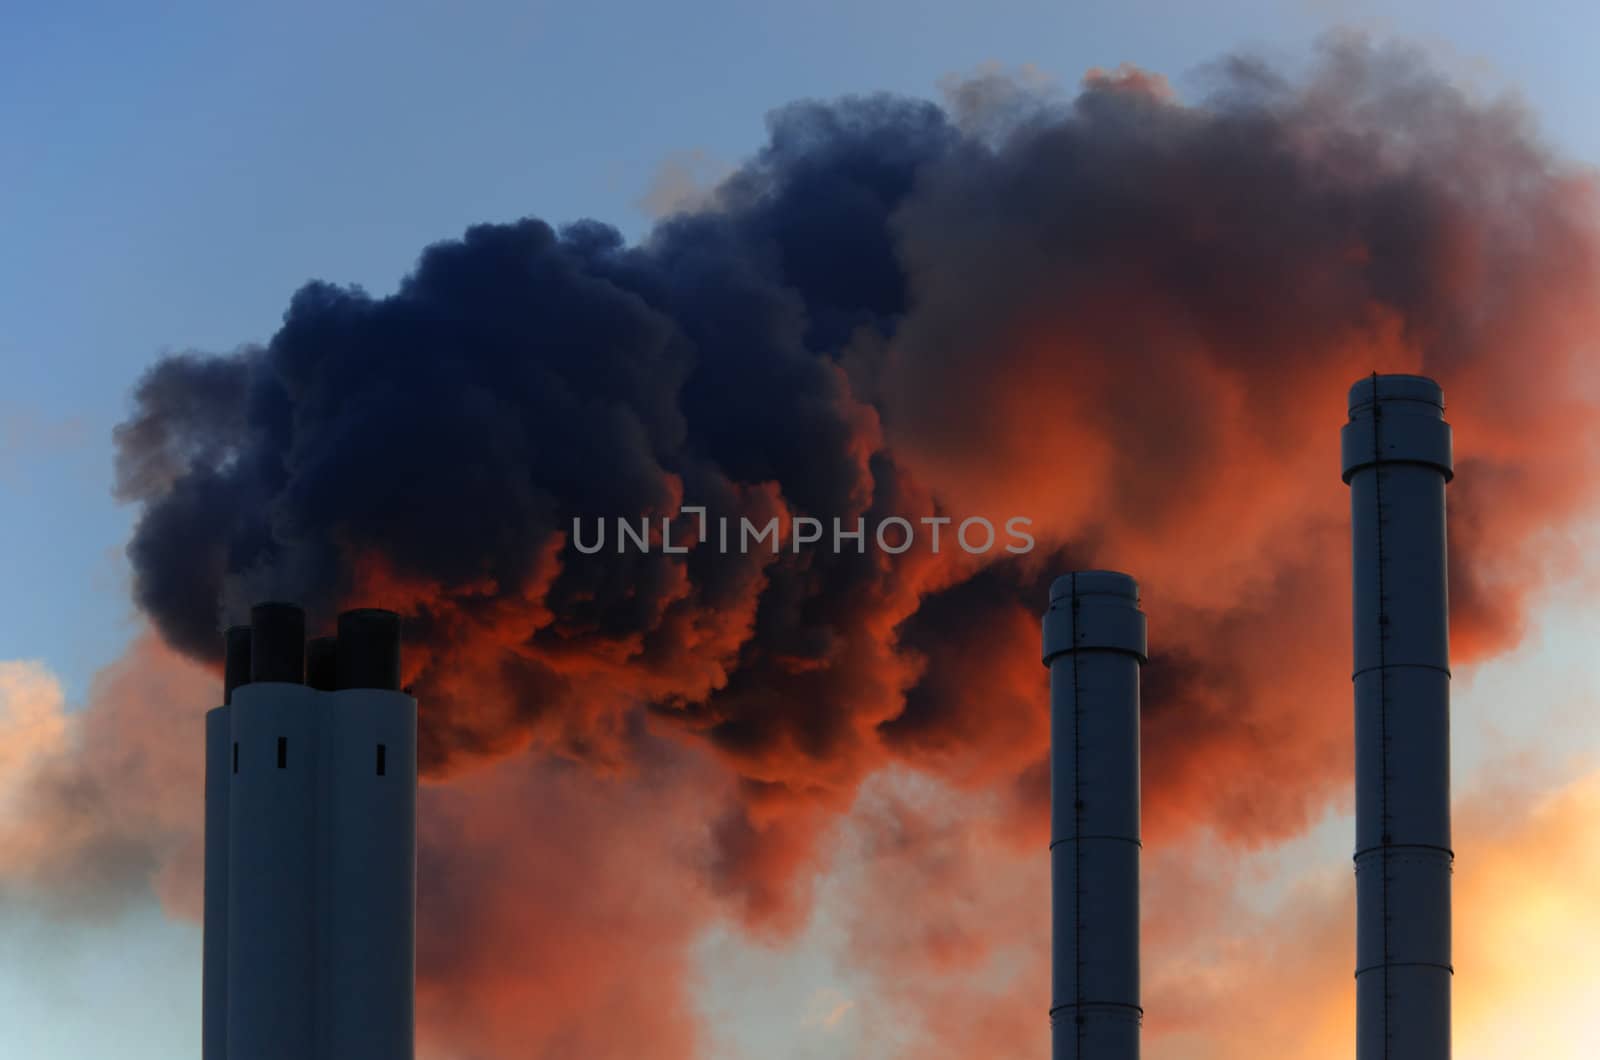 Pollution concept of smoking chimneys. The setting sun illuminates the vapor from below, giving it an ominous impression, like that of volcano smoke.